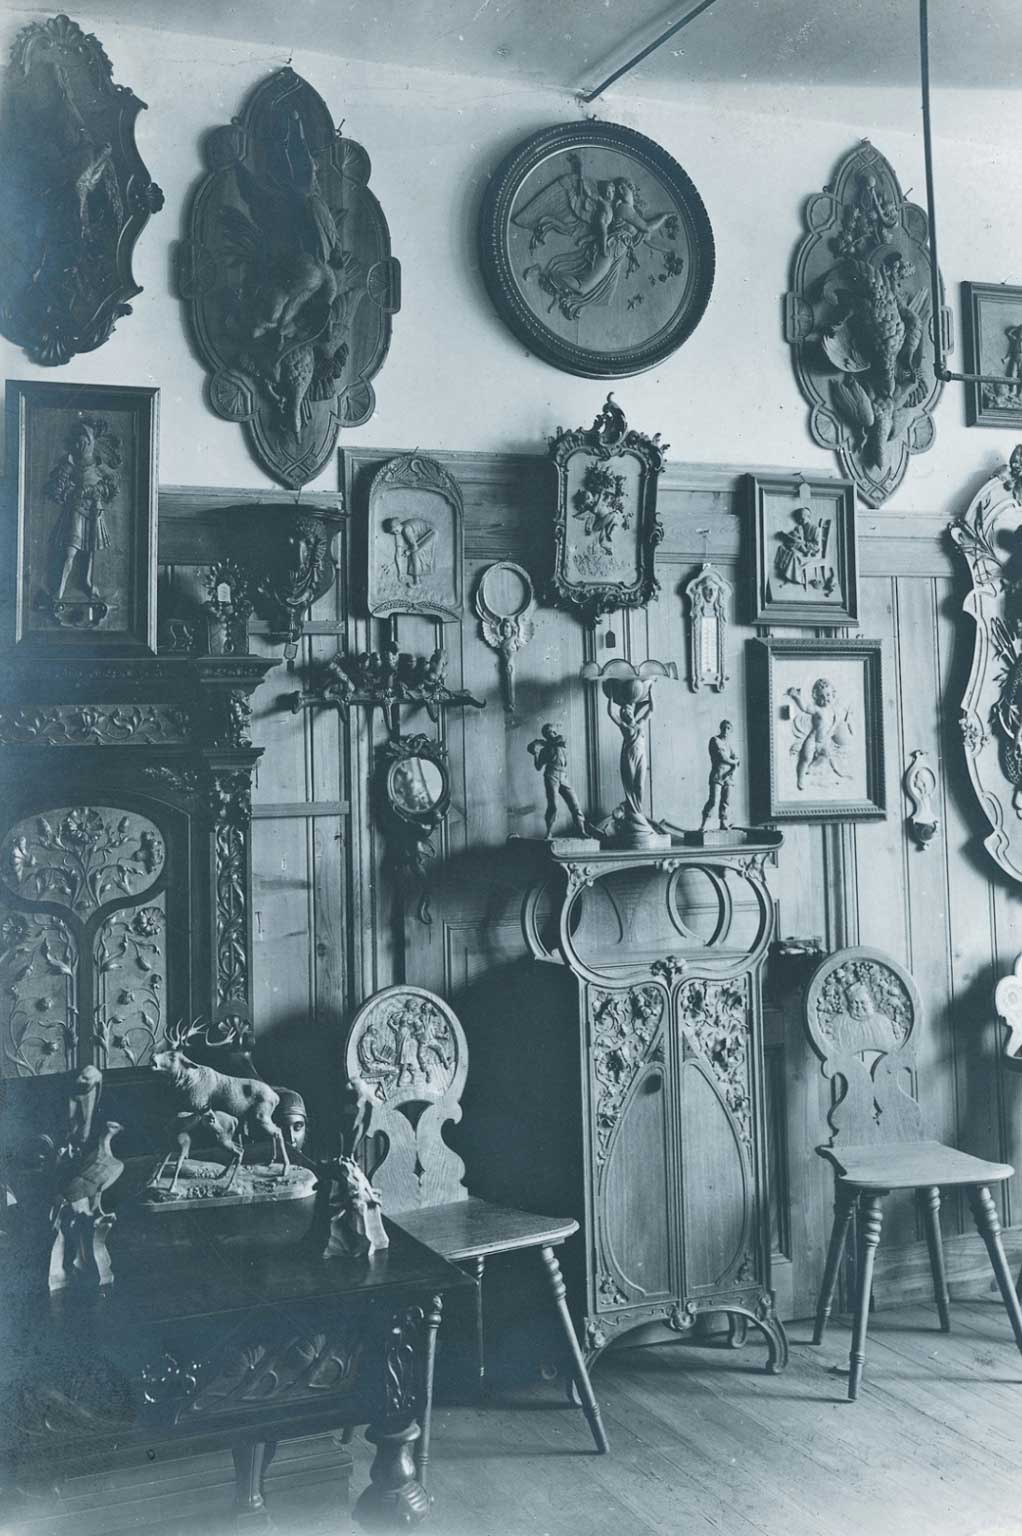 The old School of Woodcarving in Brienz: Furniture carved by students, ca 1900 © Schule für Holzbildhauerei Brienz